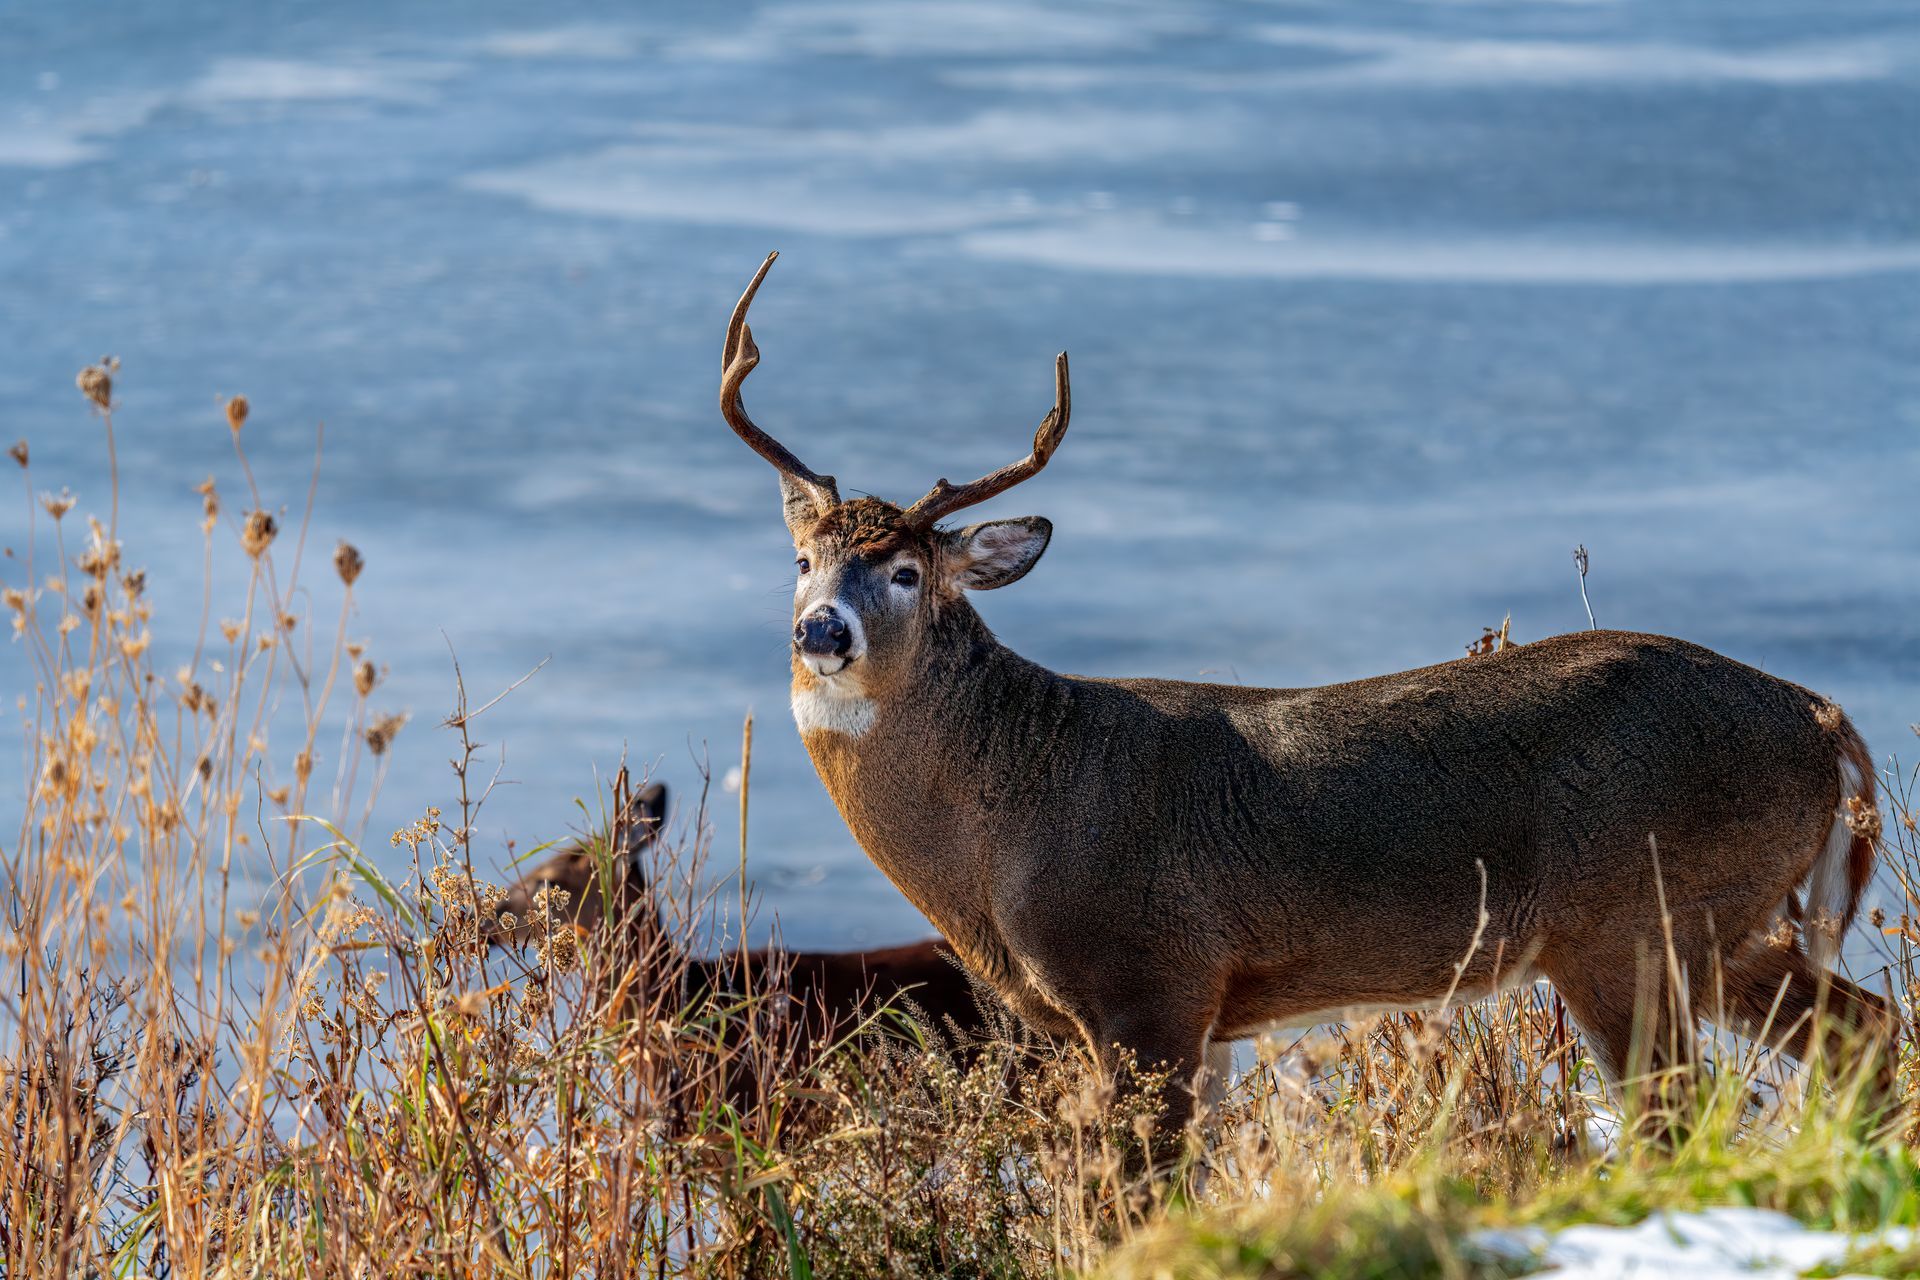 A couple of deer standing next to a body of water.